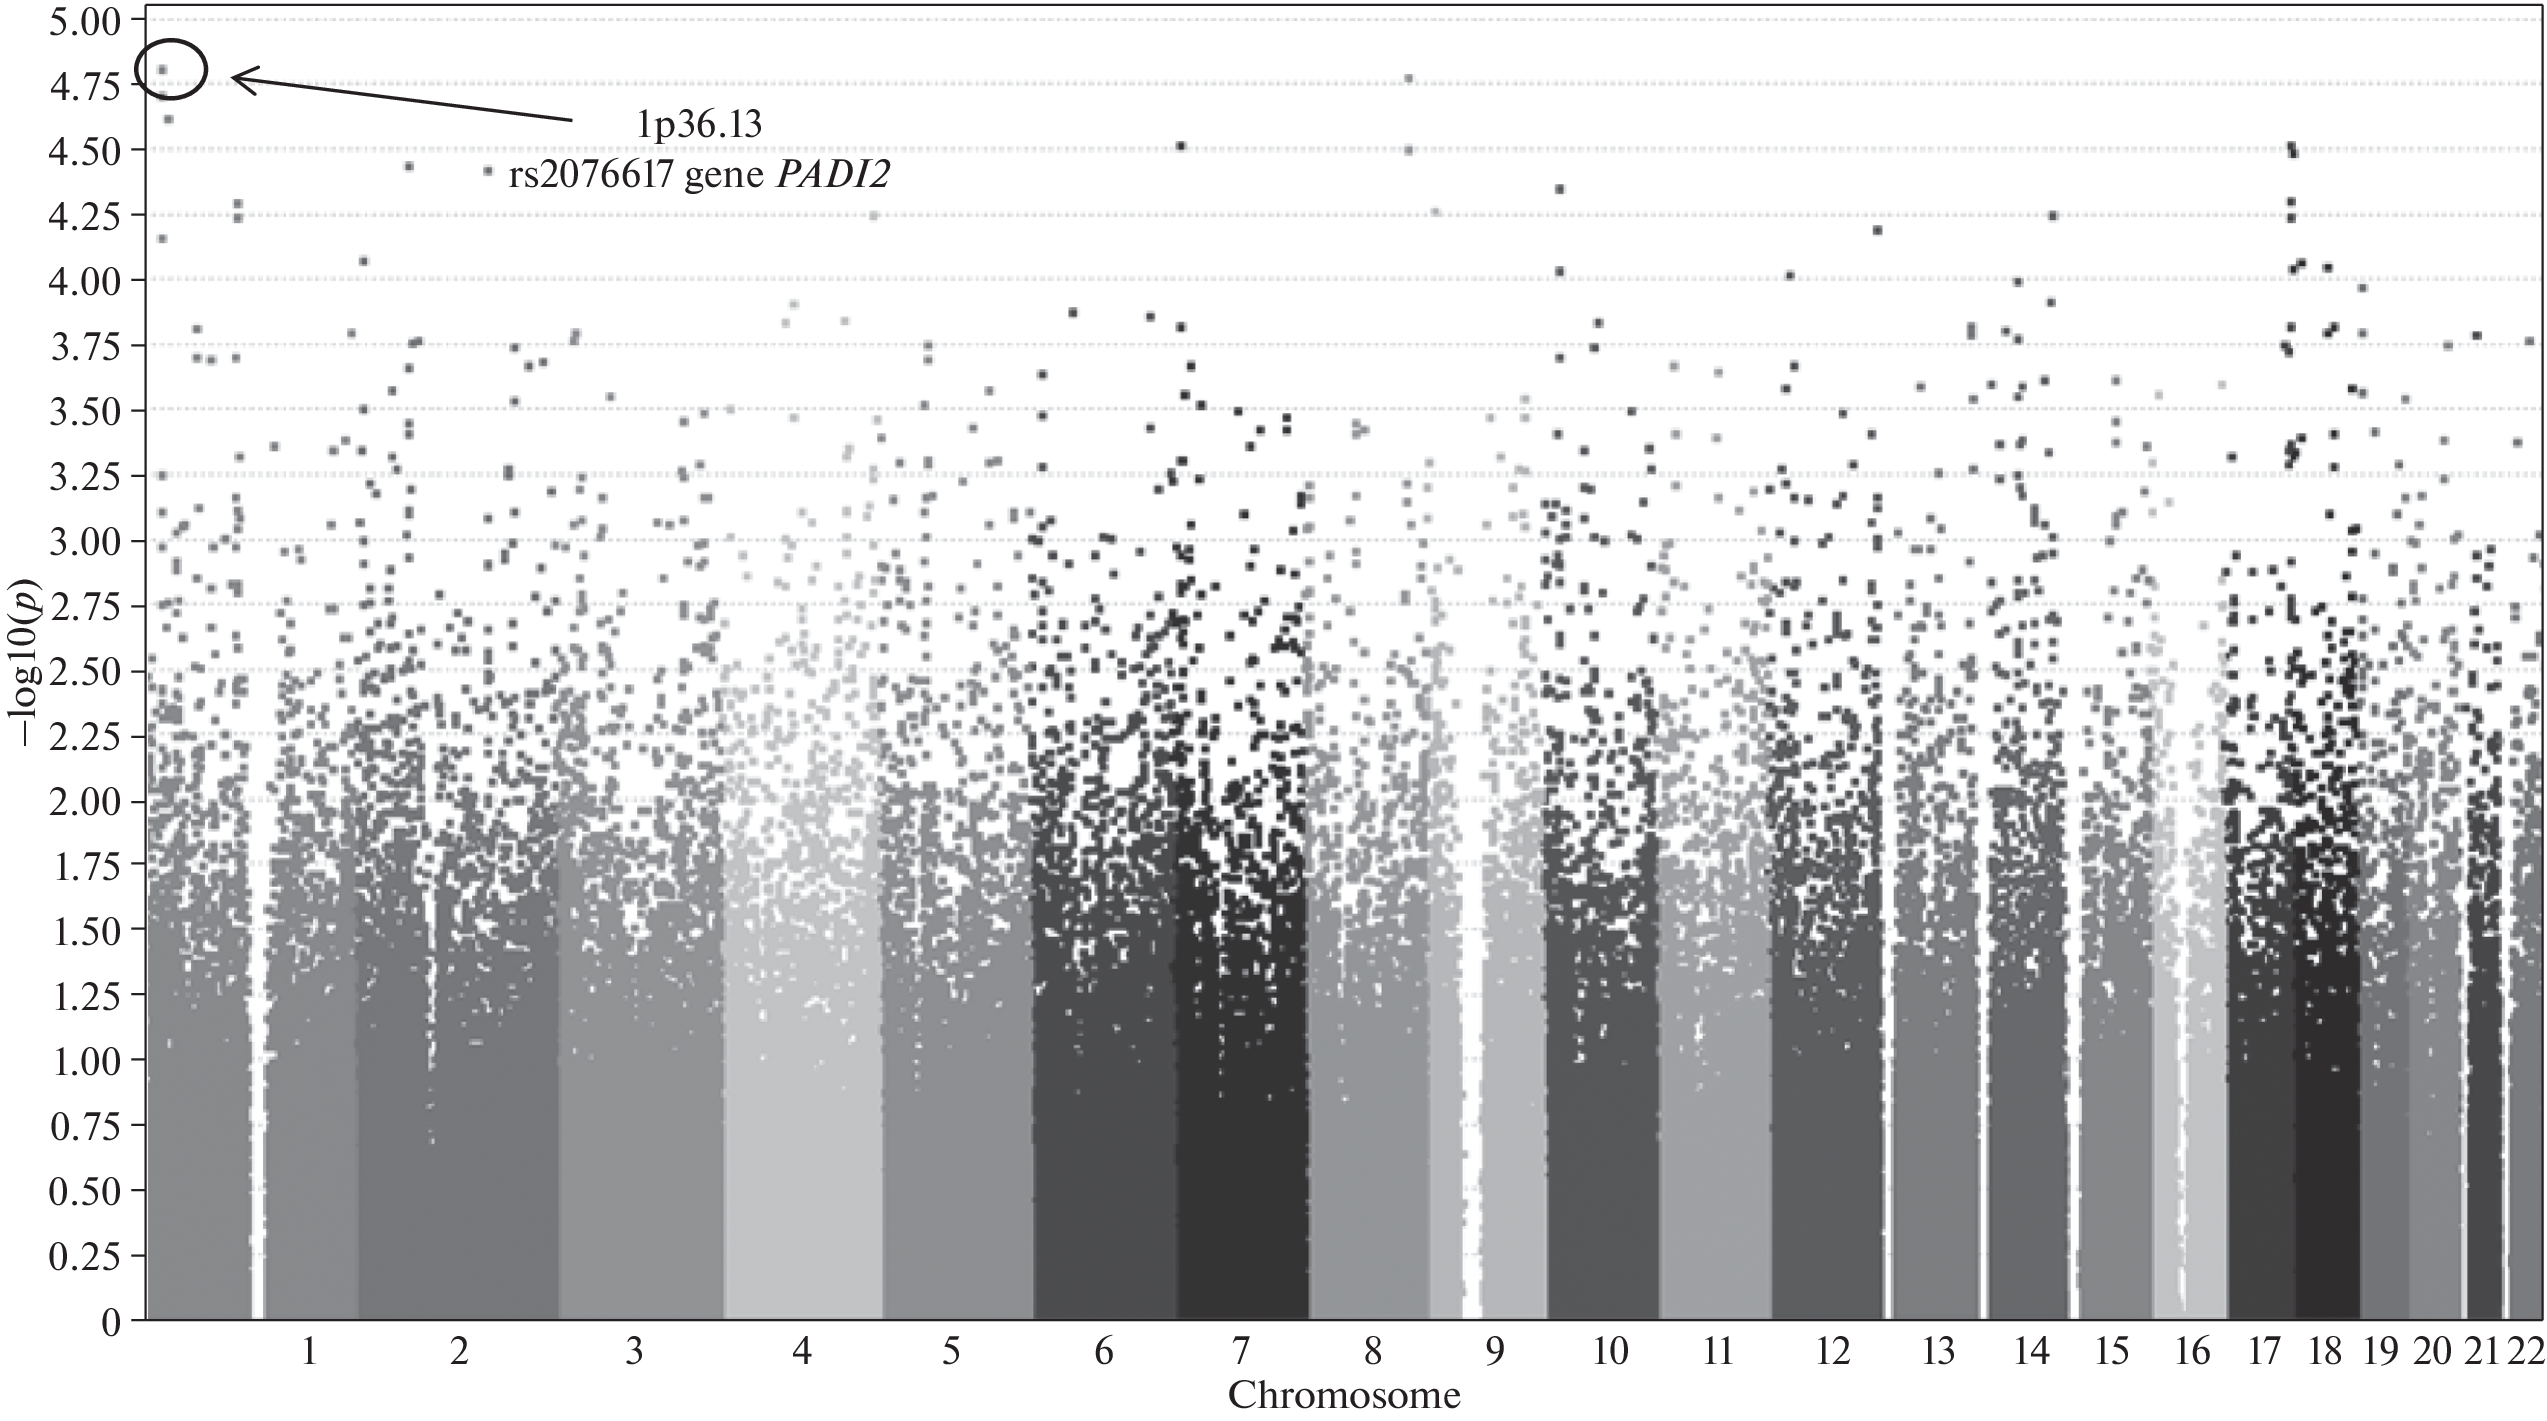 Searching for Ethnospecific Risk Markers of Paranoid Schizophrenia in Bashkirs Based on the Results from Genome-Wide Association Study